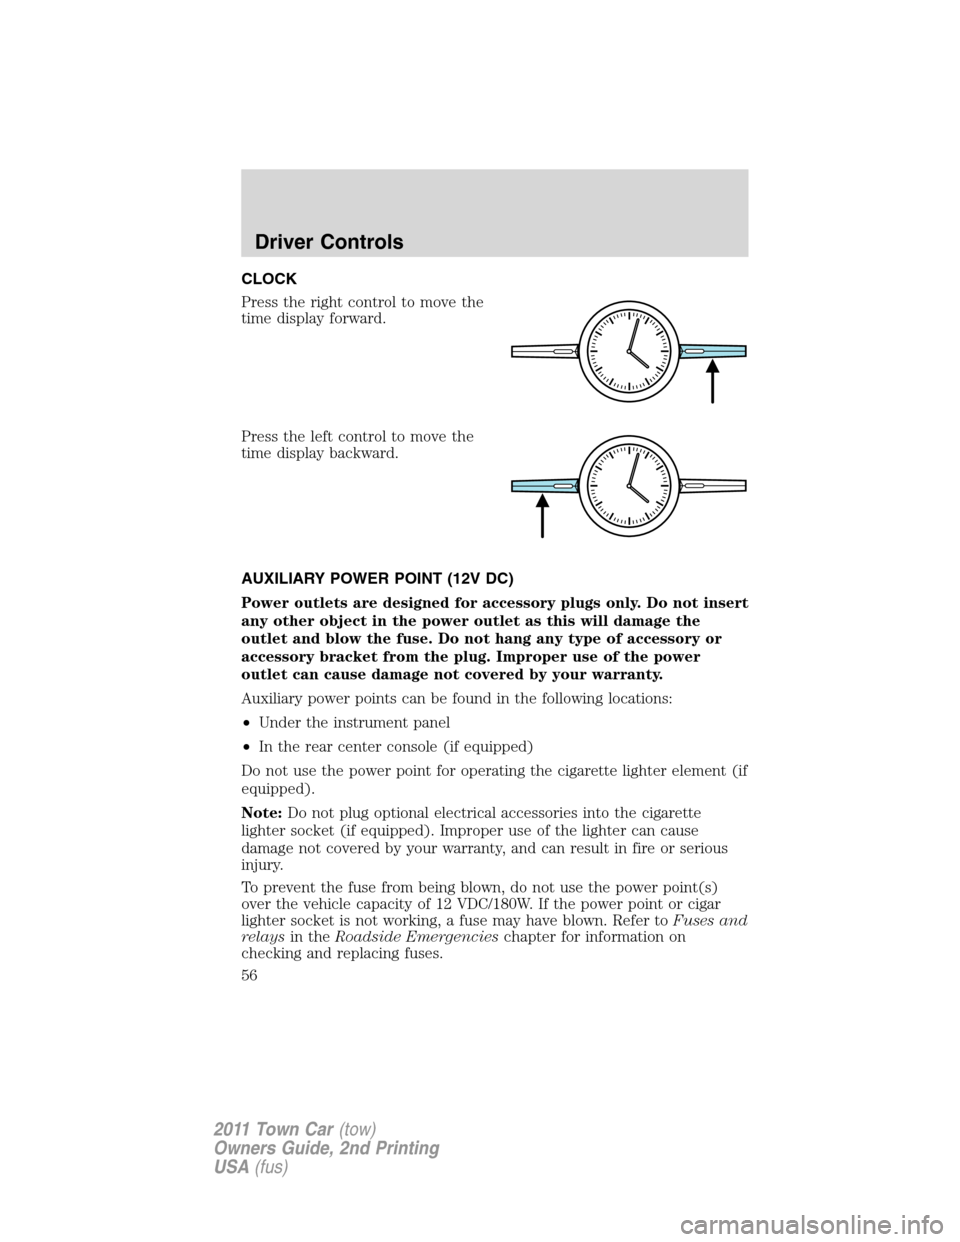 LINCOLN TOWN CAR 2011 Workshop Manual CLOCK
Press the right control to move the
time display forward.
Press the left control to move the
time display backward.
AUXILIARY POWER POINT (12V DC)
Power outlets are designed for accessory plugs 